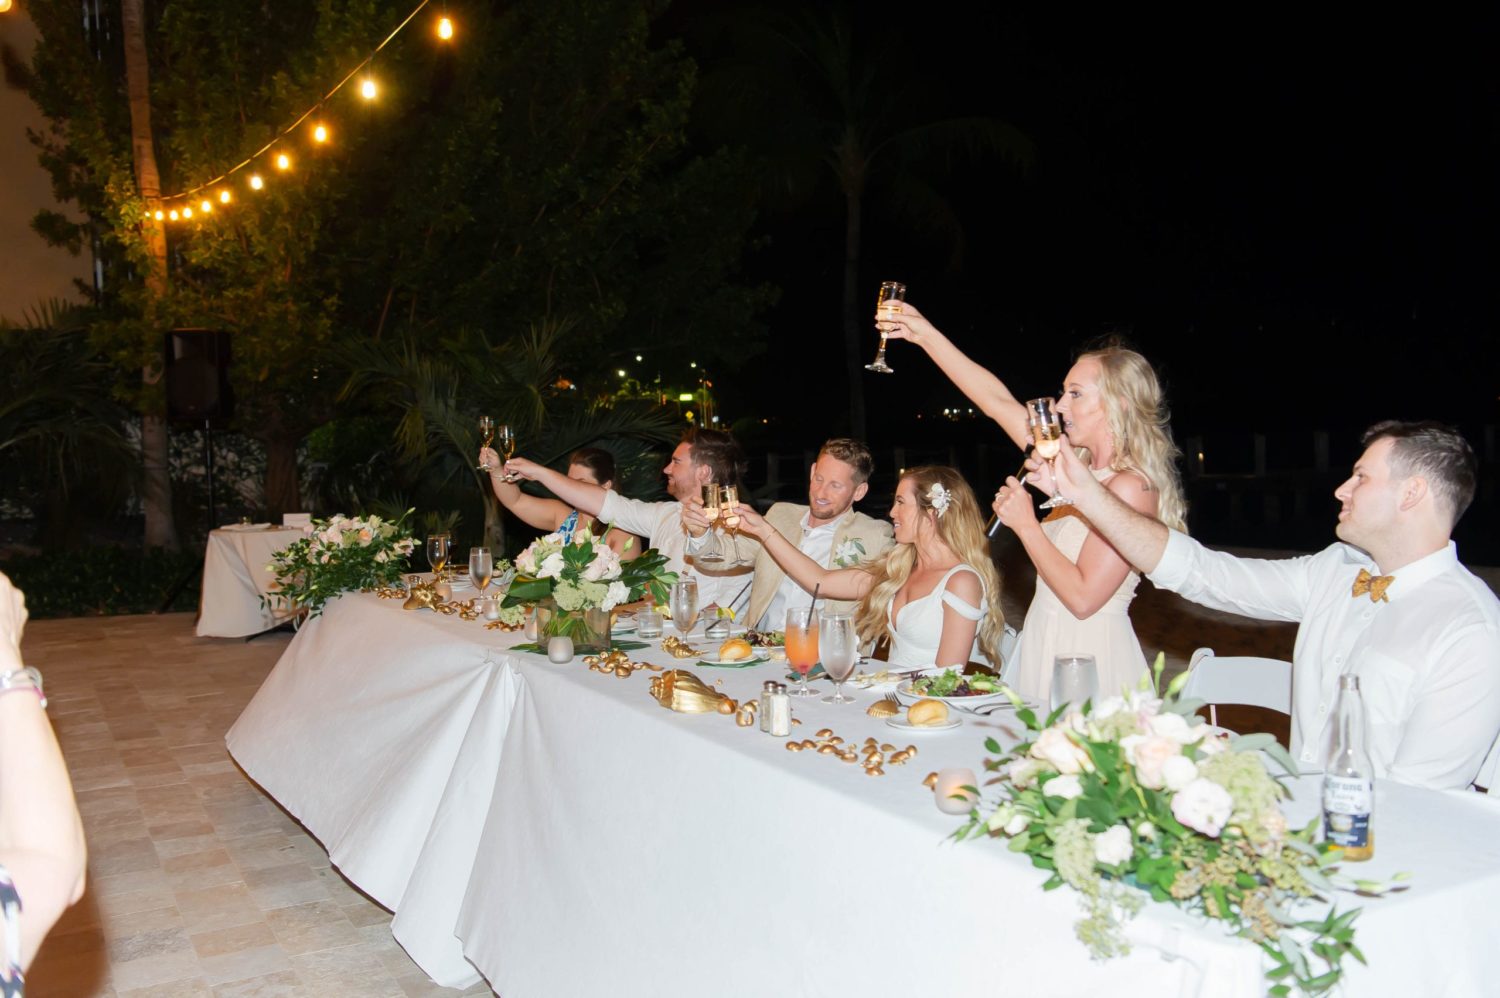 wedding reception toast by maid of honor at florida beach outdoor wedding